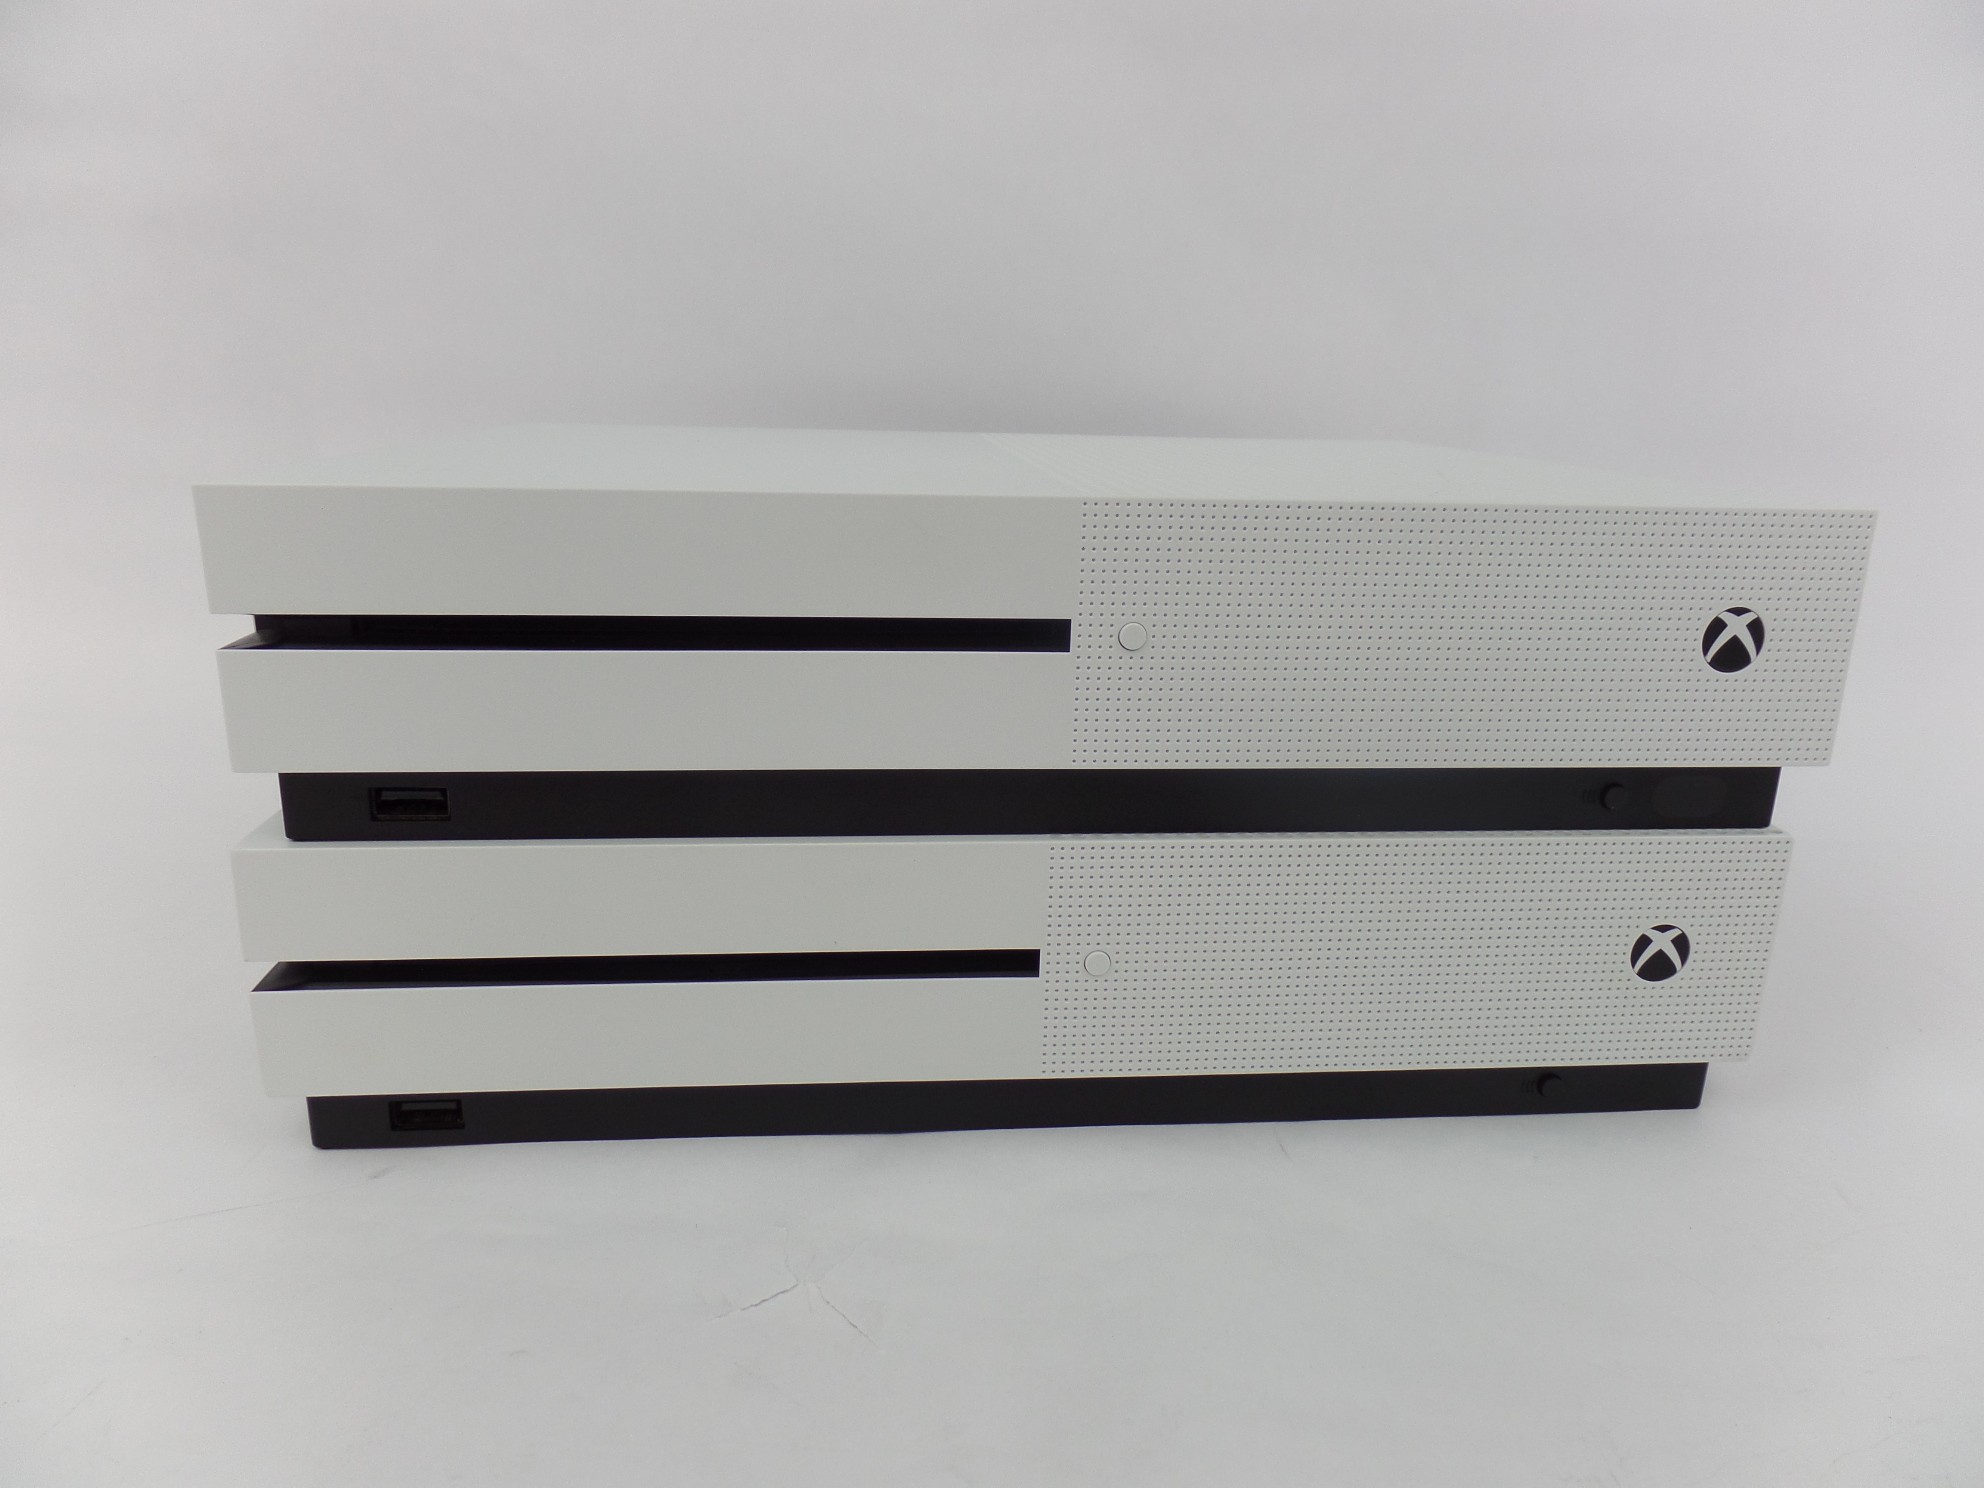 Lot of 2 Units XBOX ONE S Model 1681 For parts